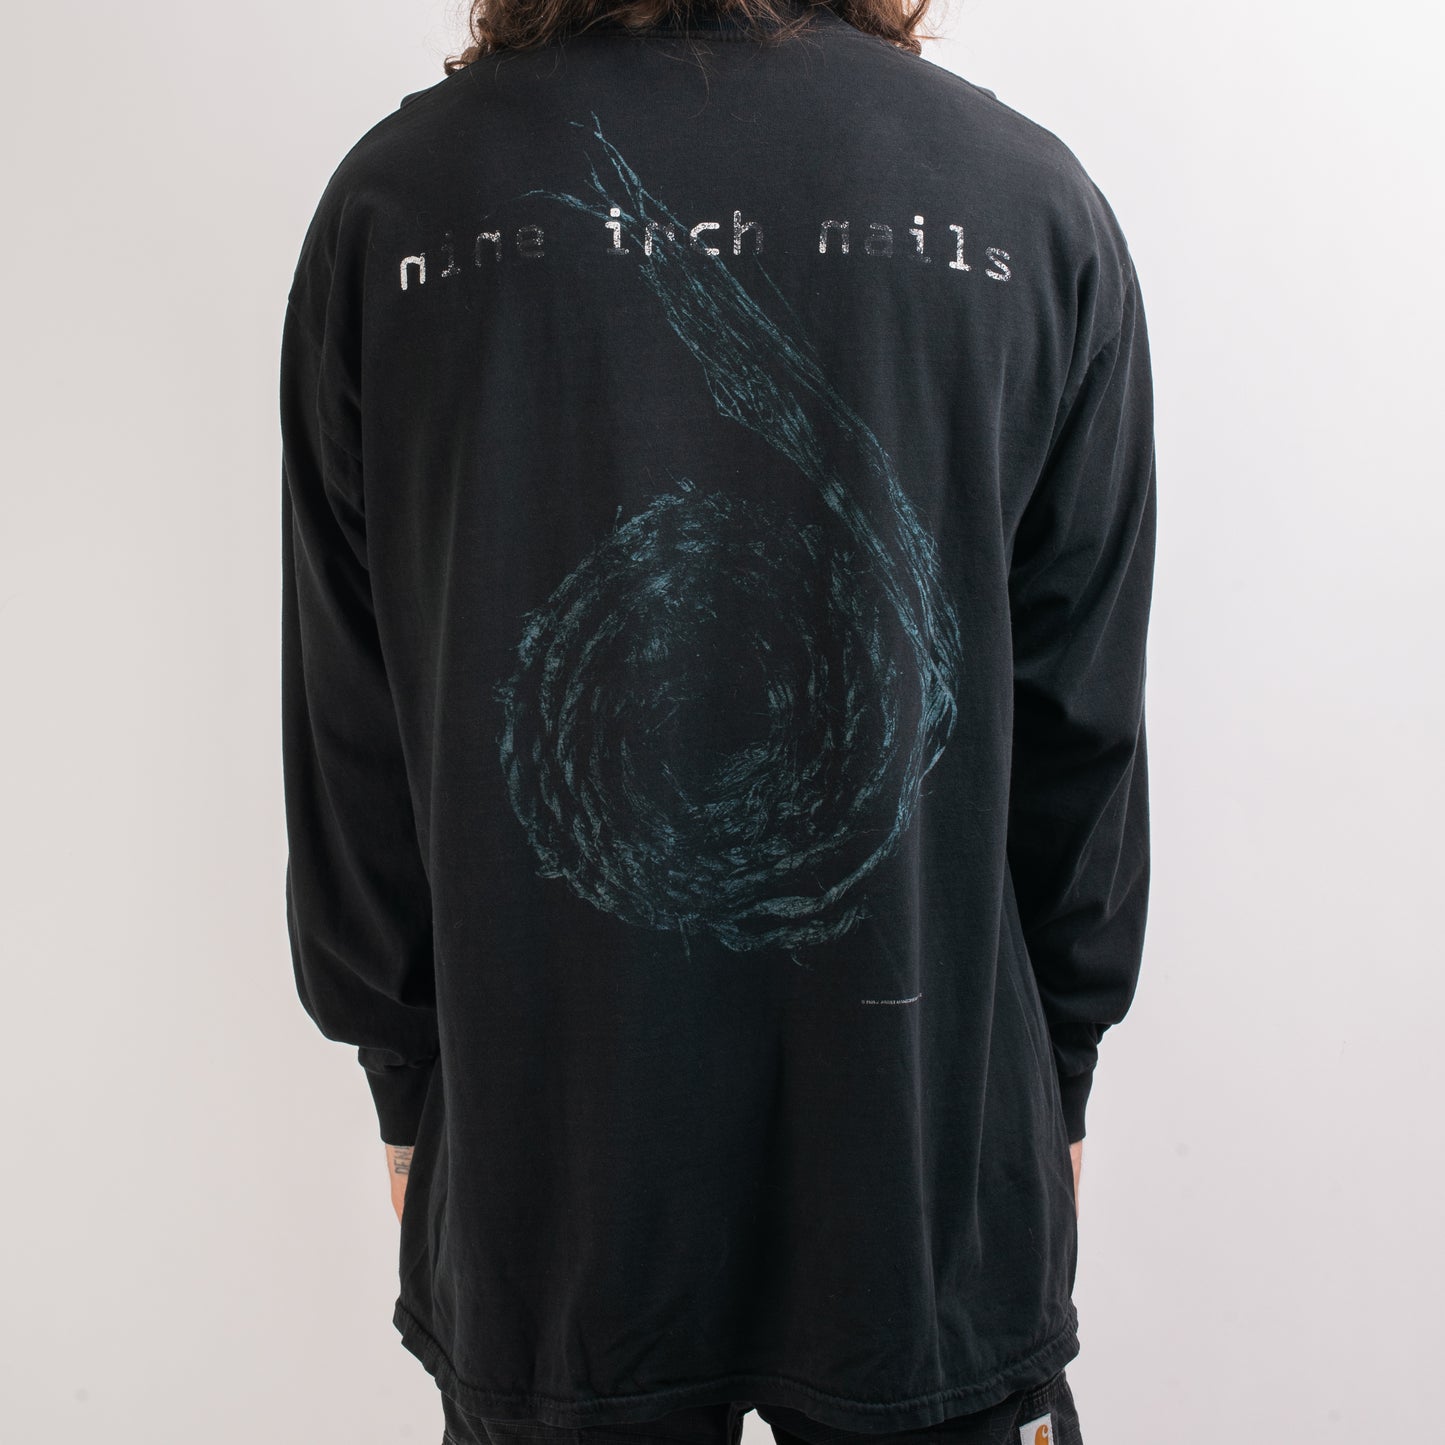 Vintage 1995 Nine Inch Nails The Becoming Longsleeve